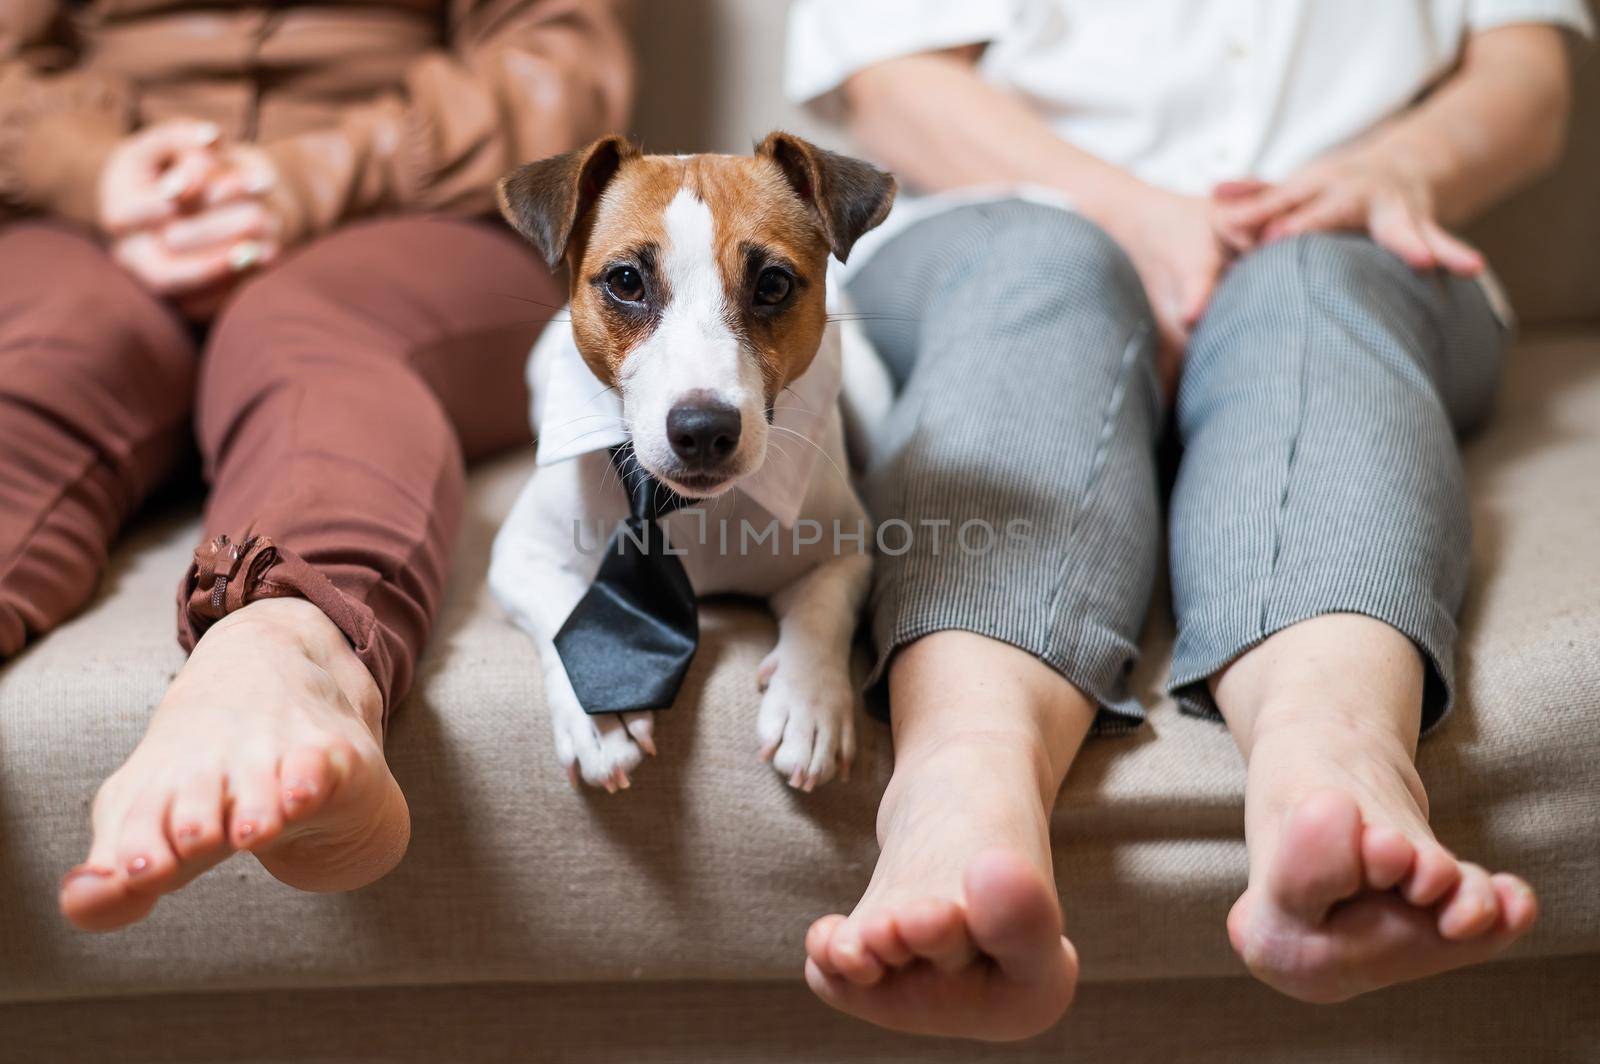 A cute dog Jack Russell Terrier is wearing a tie and sitting with two women on the couch by mrwed54